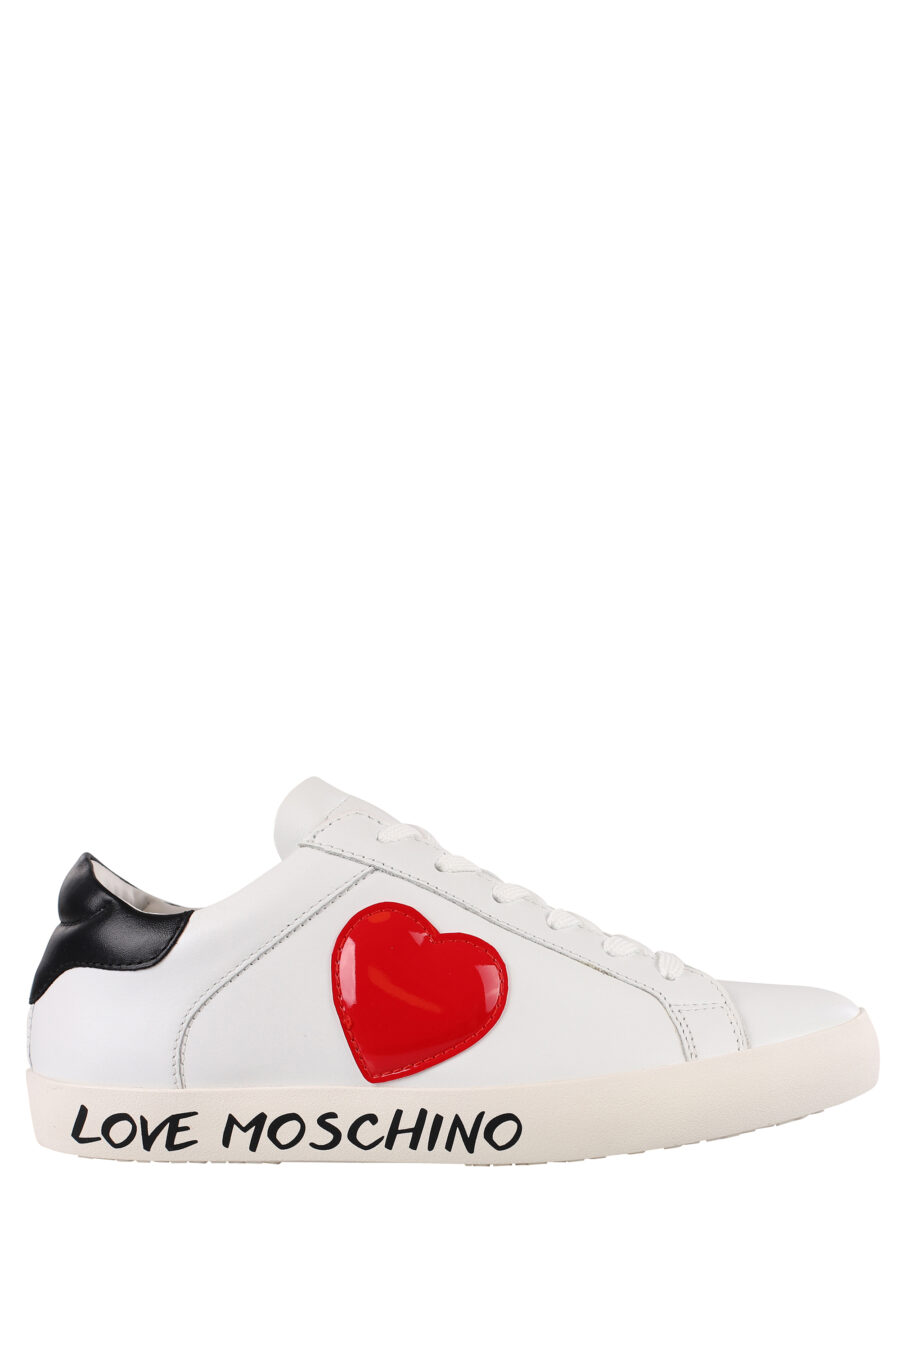 White trainers with red heart on the side and logo on the sole - IMG 1206